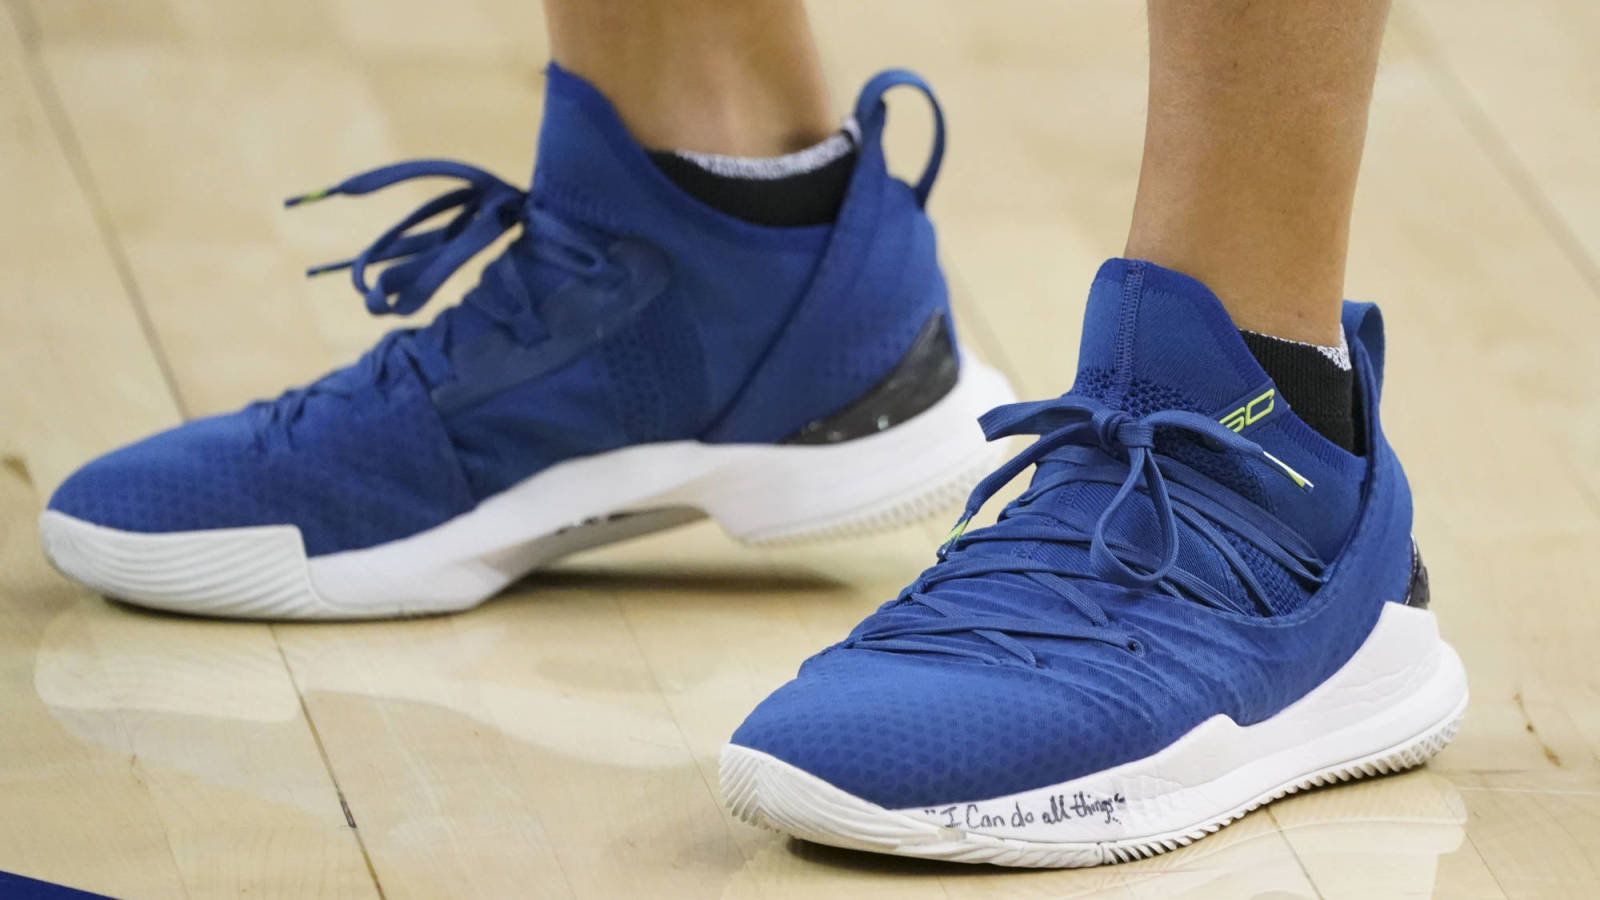 Stephen Curry responds to letter about lack of Curry 5s in girl sizes ...